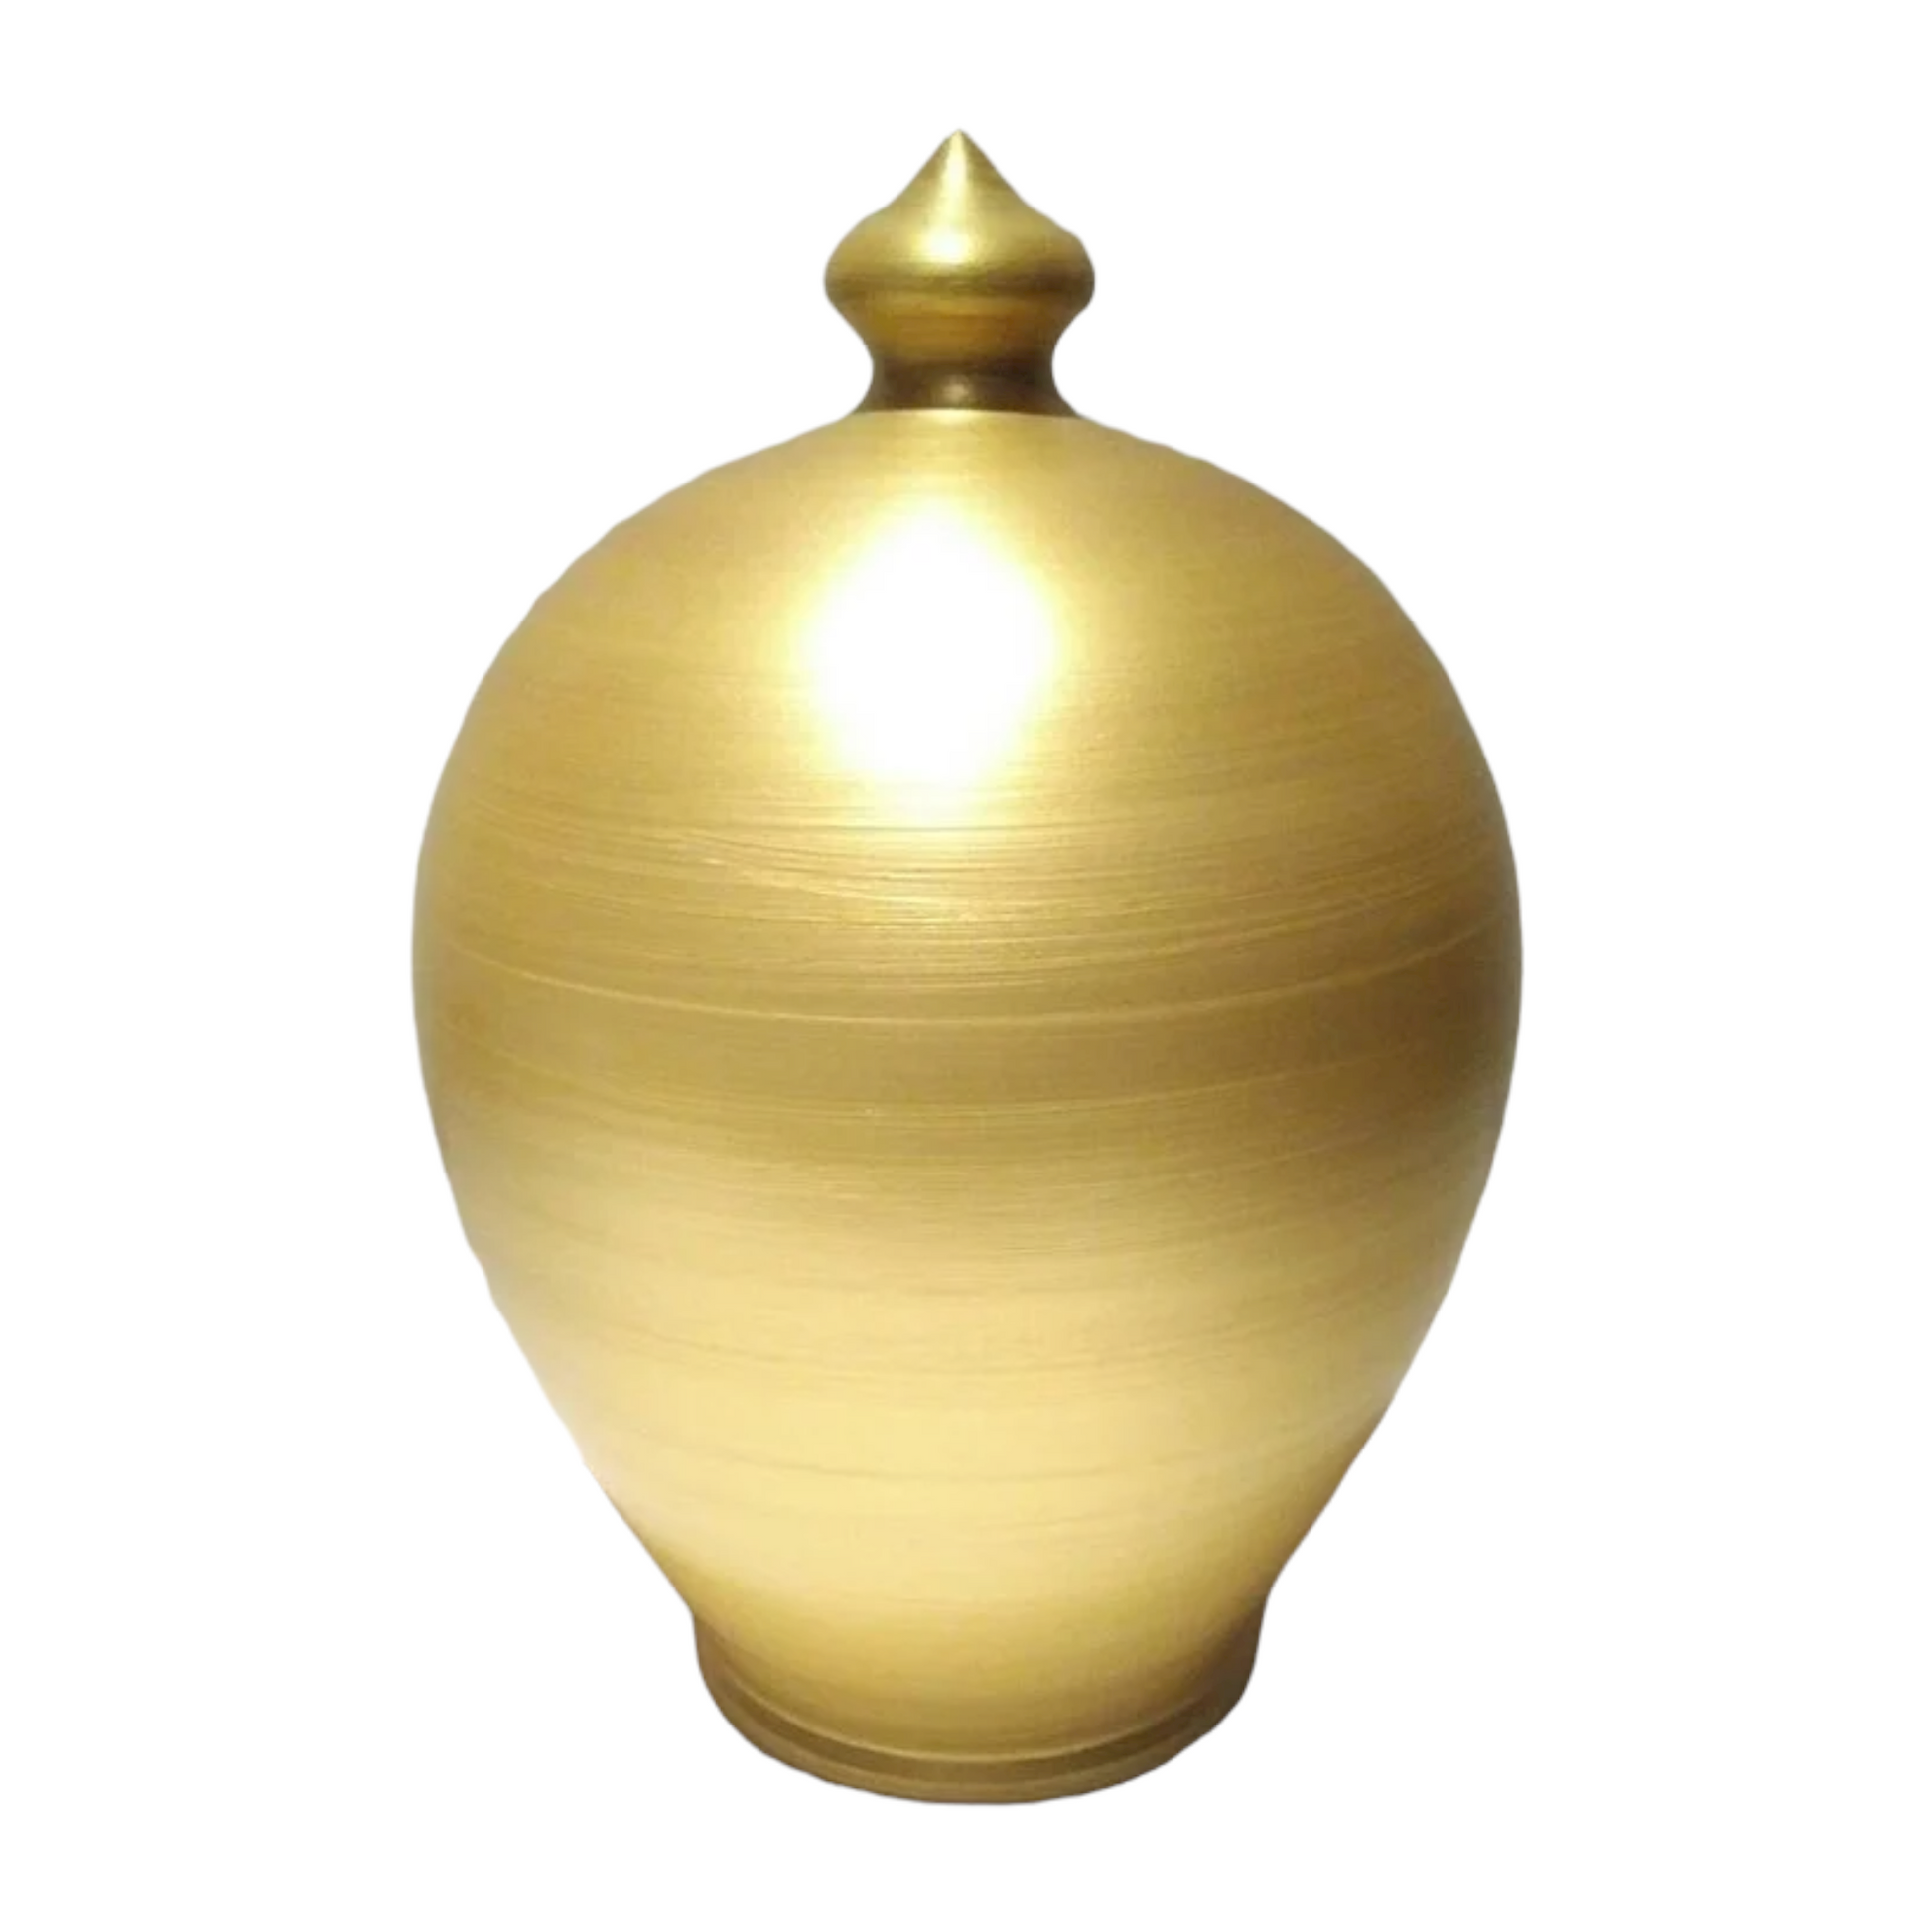 Gold Piggy Bank, 10 inch height, adult coin bank, piggy bank for adults. Color: gold. Made to order. Size: 25 cm = 9.8425 Inches. With hole and stopper plug, or without hole.